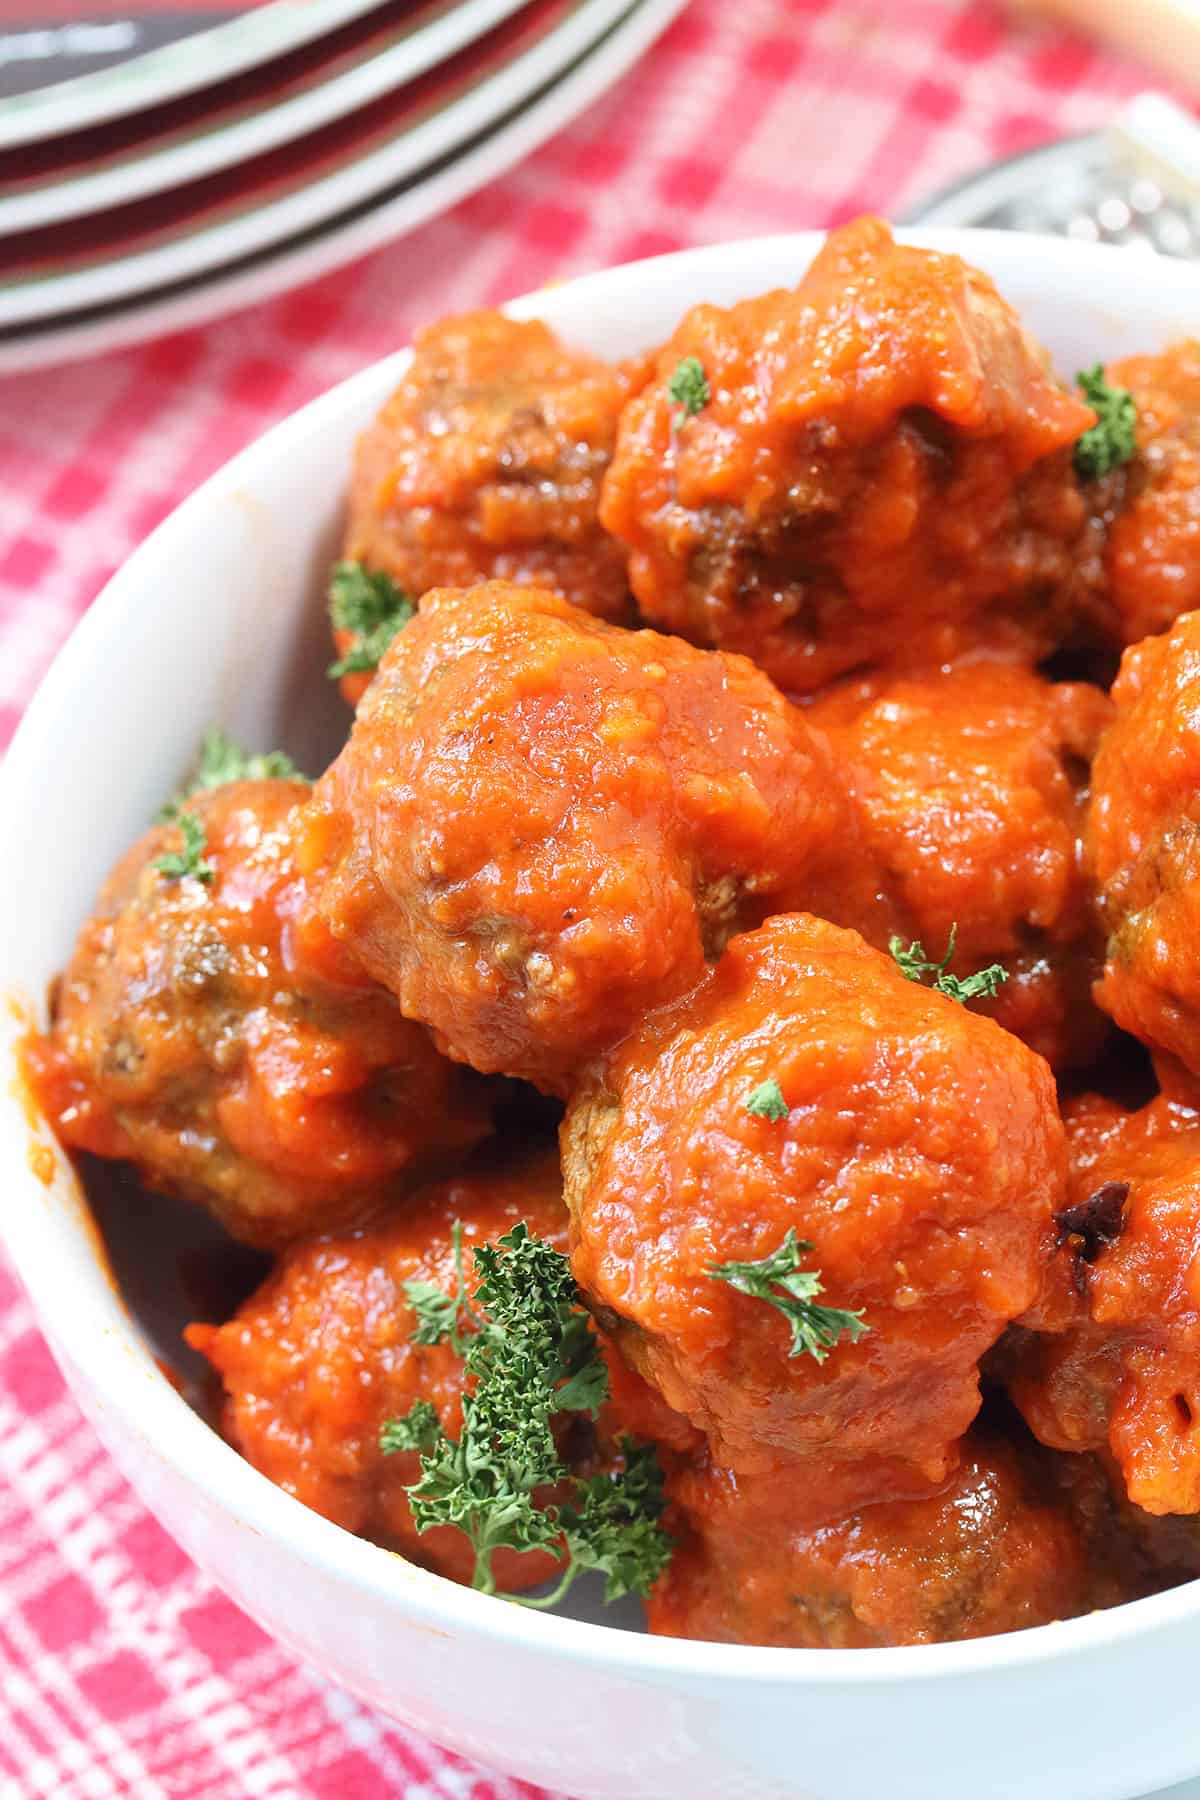 Partial closeup view of air fried meatballs covered in sauce in white bowl.